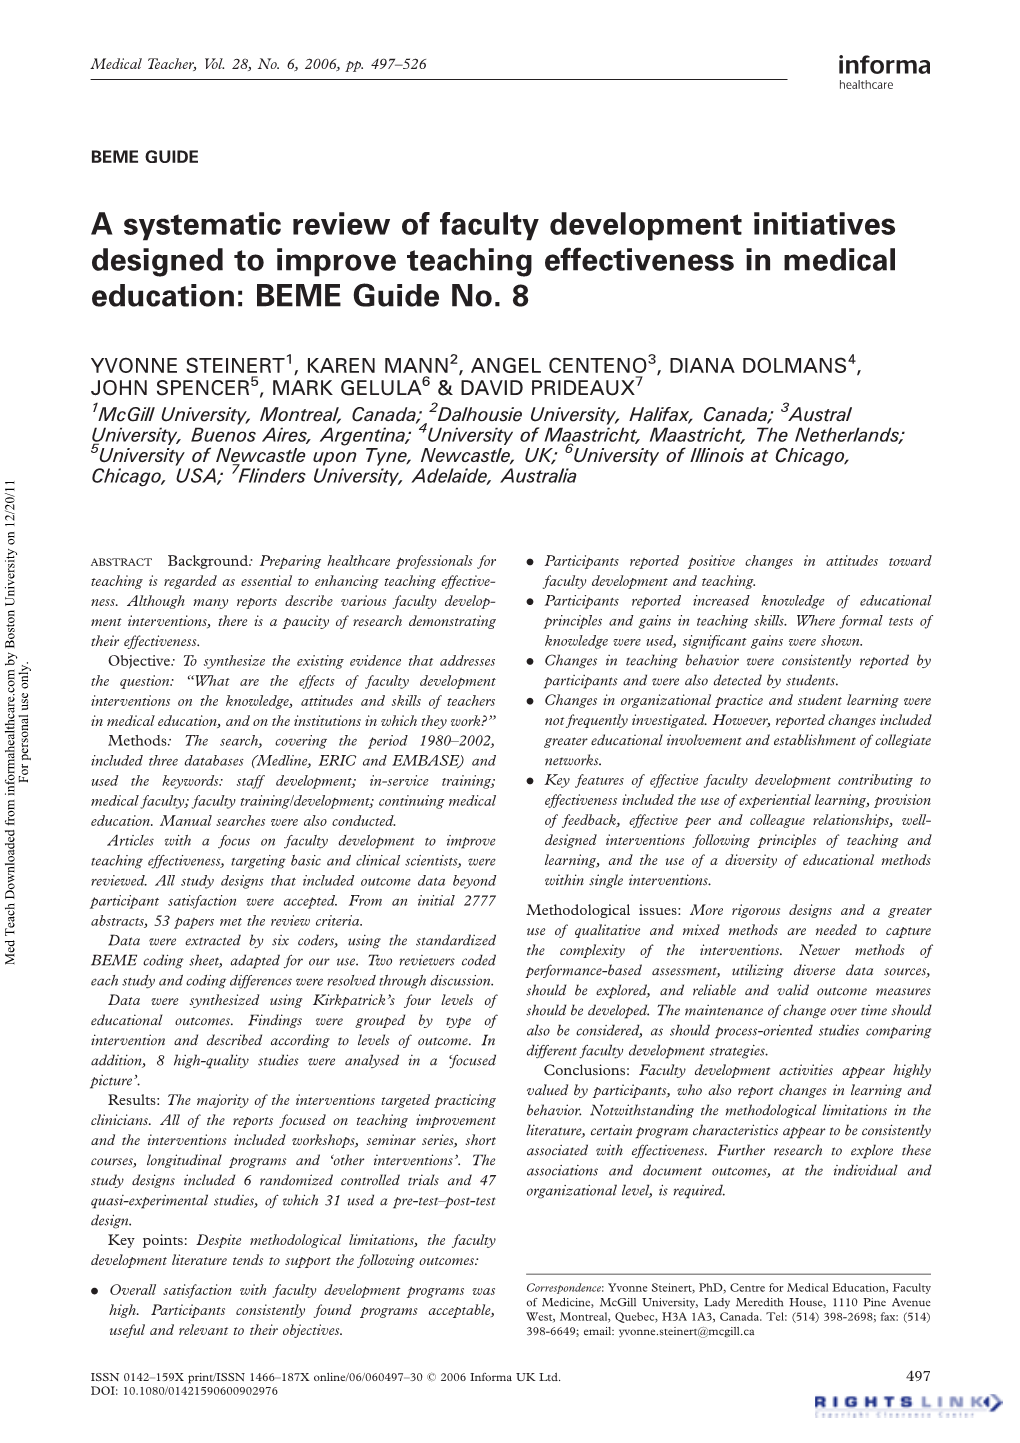 A Systematic Review of Faculty Development Initiatives Designed to Improve Teaching Effectiveness in Medical Education: BEME Guide No